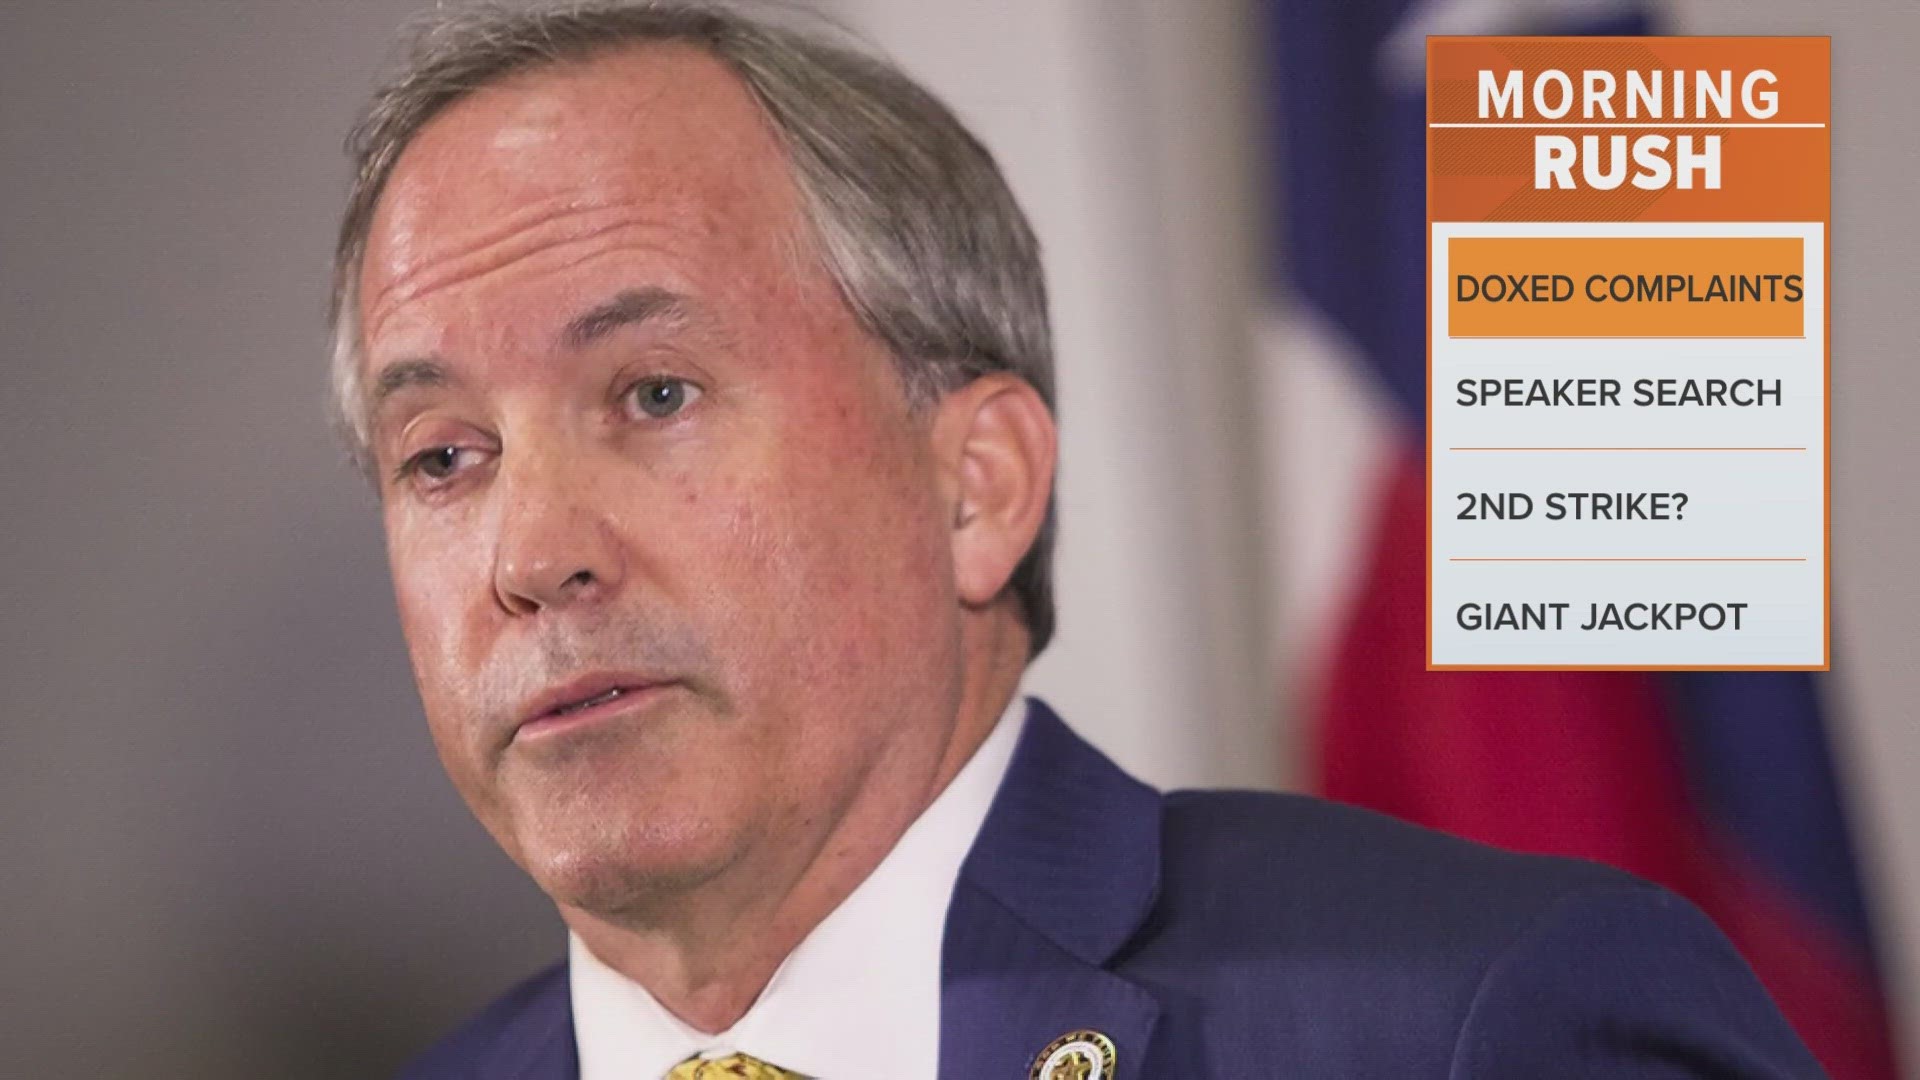 The 12 House representatives being targeted by Paxton led the impeachment trial in the Senate after the House overwhelmingly voted to impeach Paxton in May.